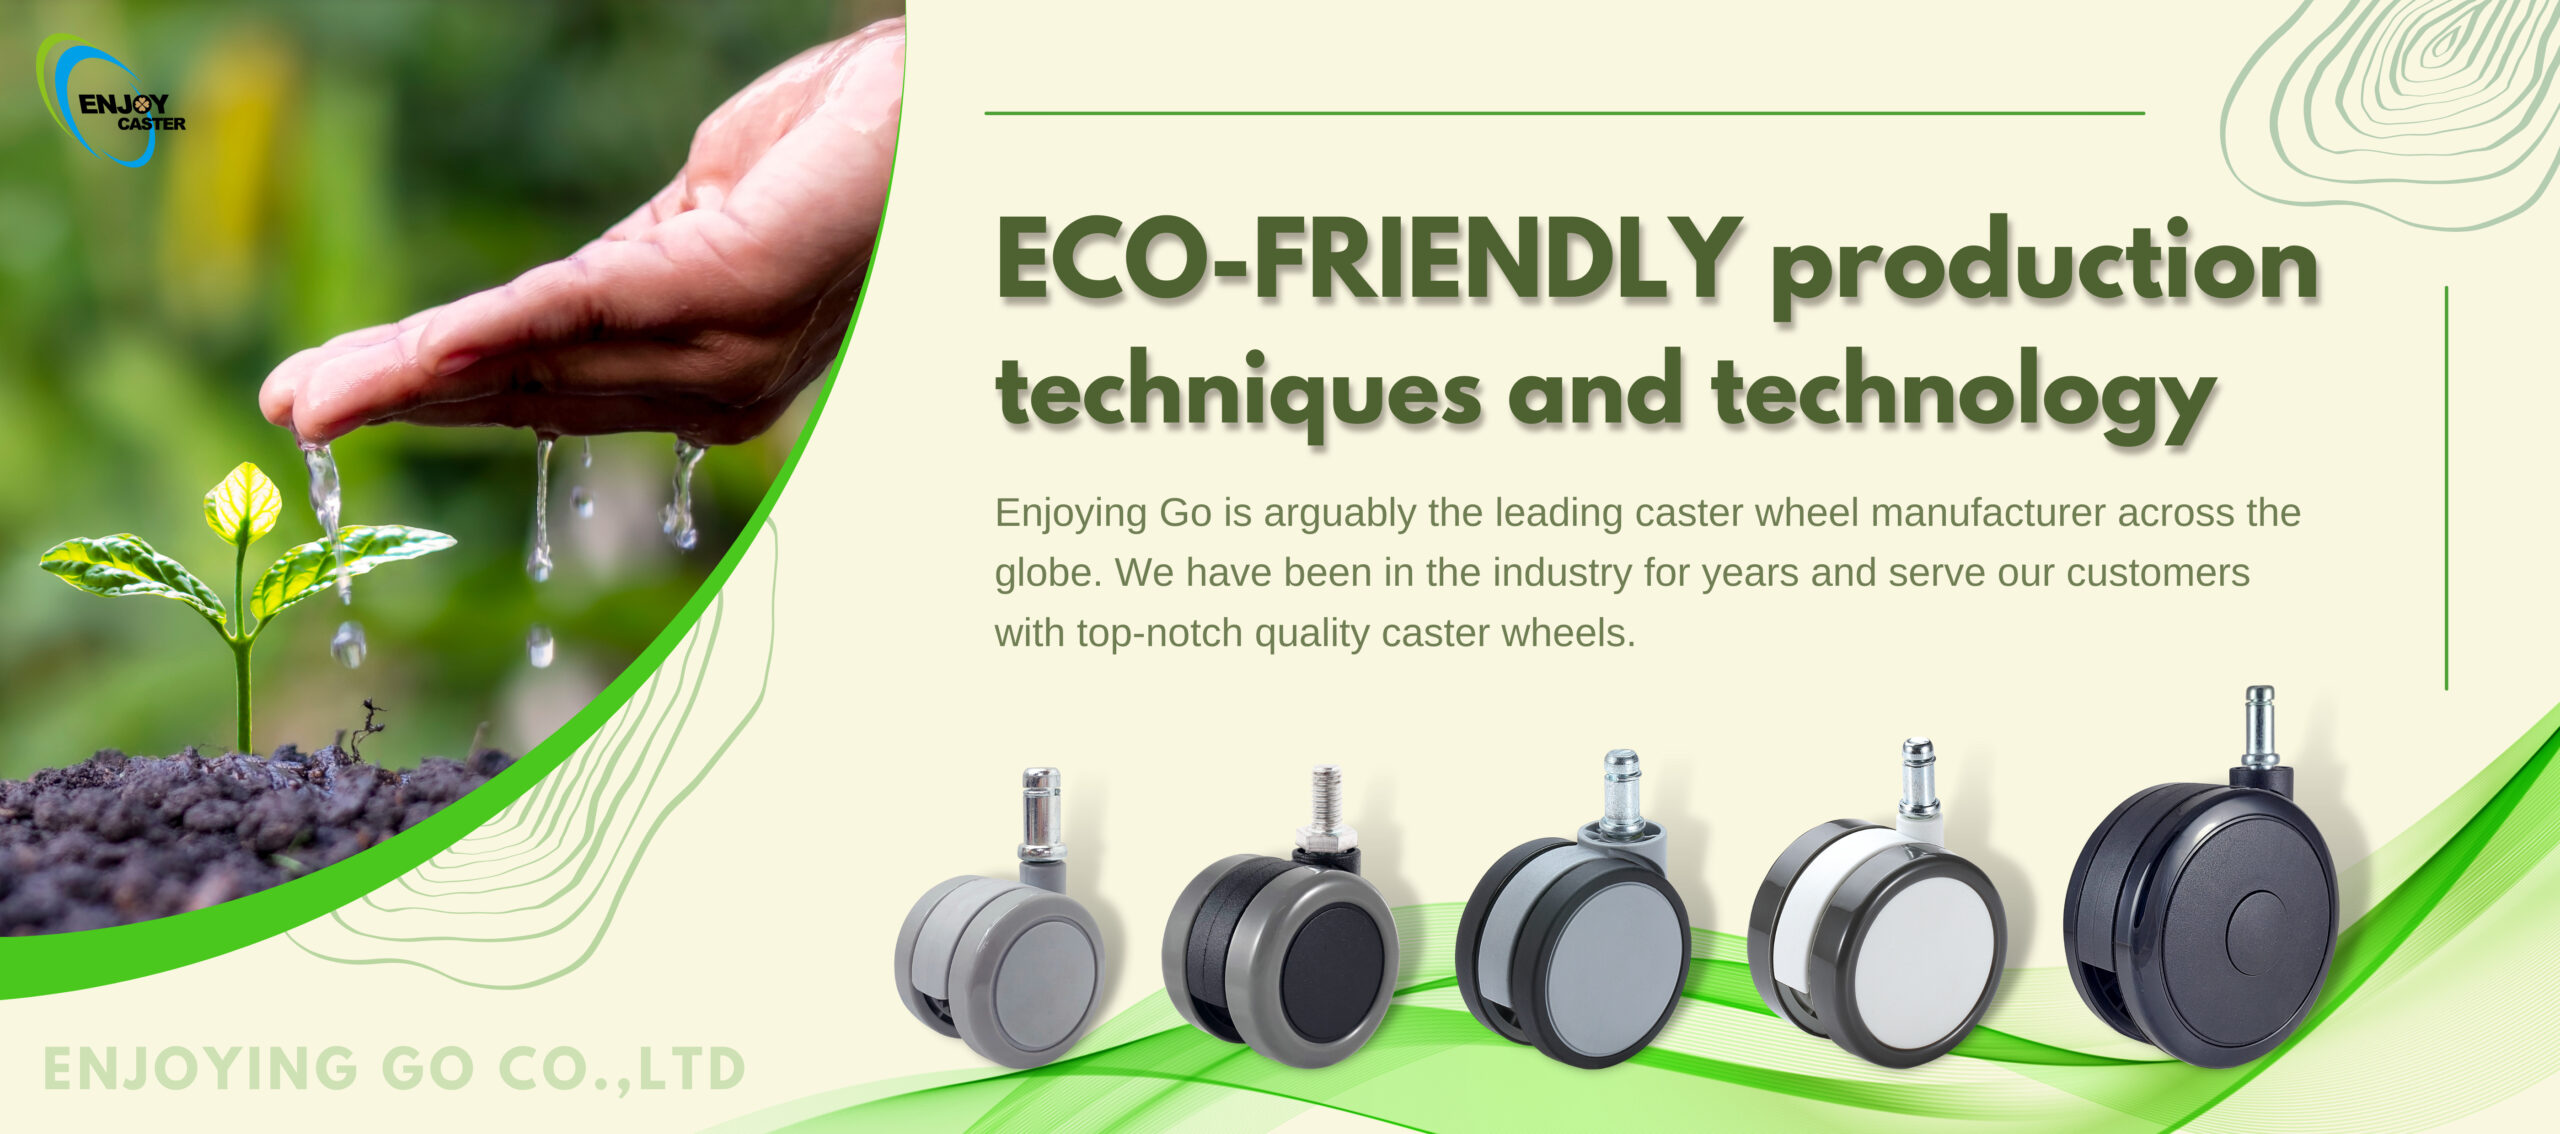 We use ECO-FRIENDLY production techniques and technology.